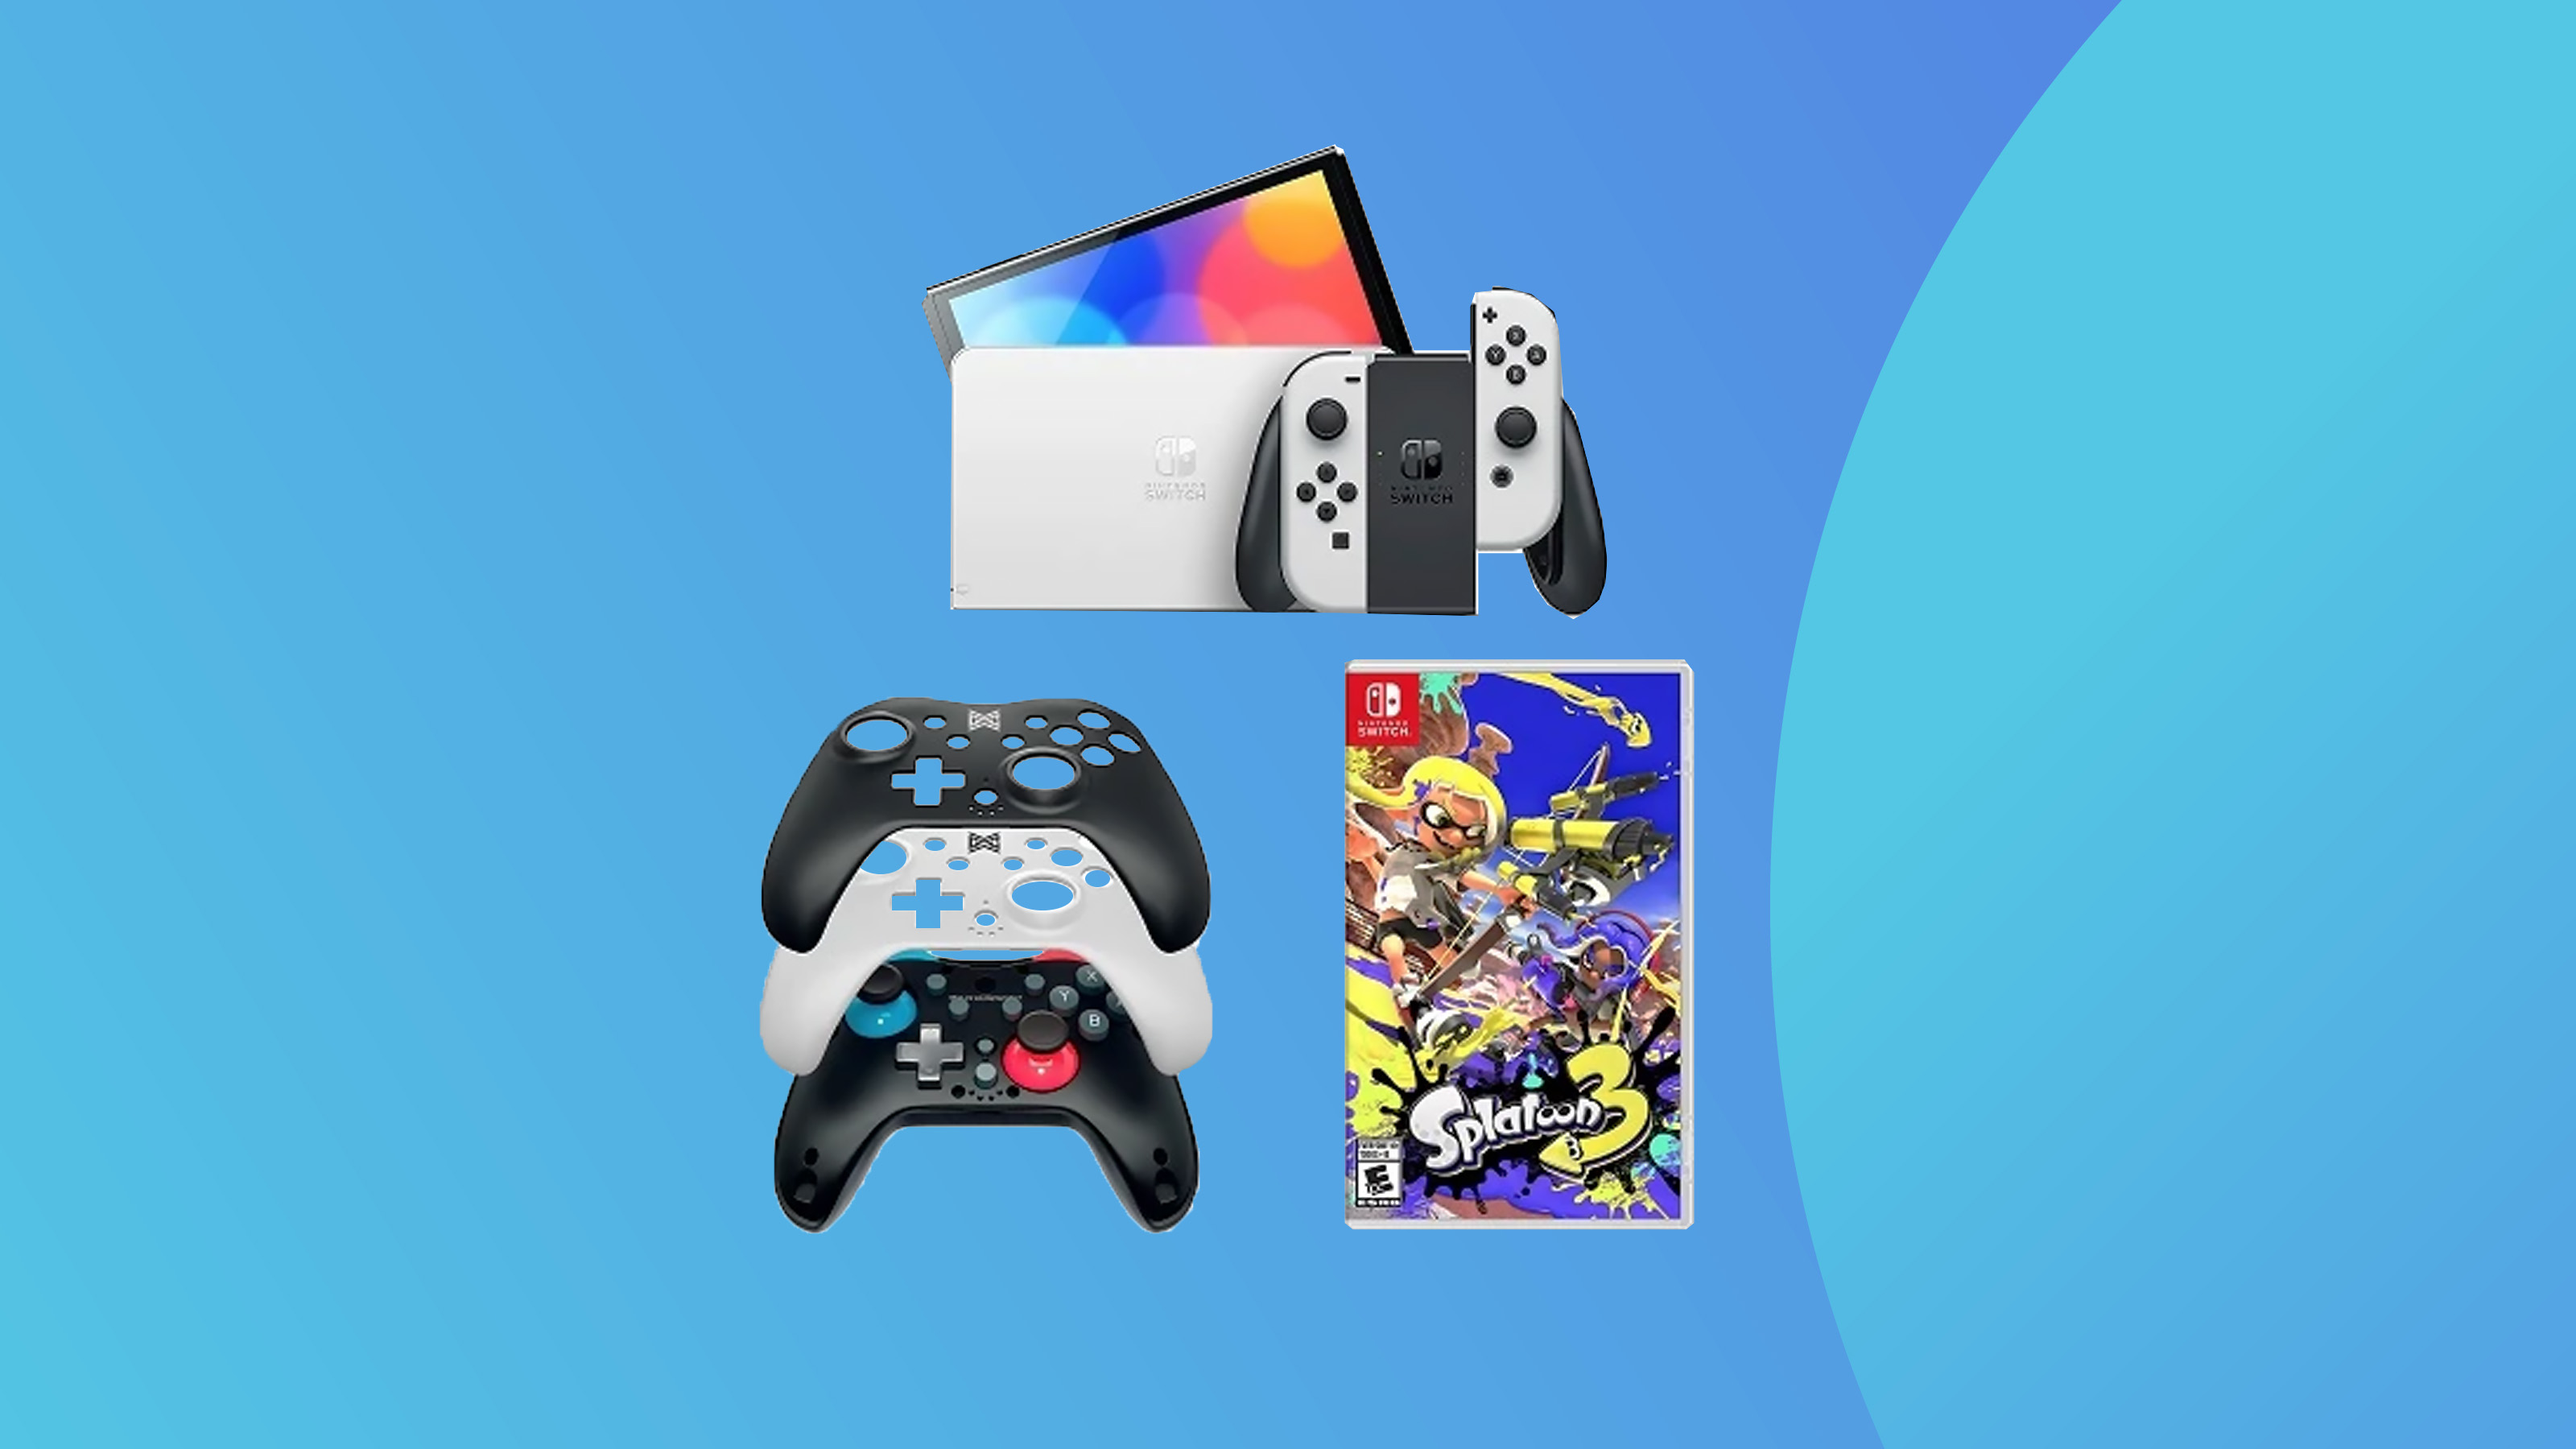 A product shot of the Switch Oled and accessories on a colourful background